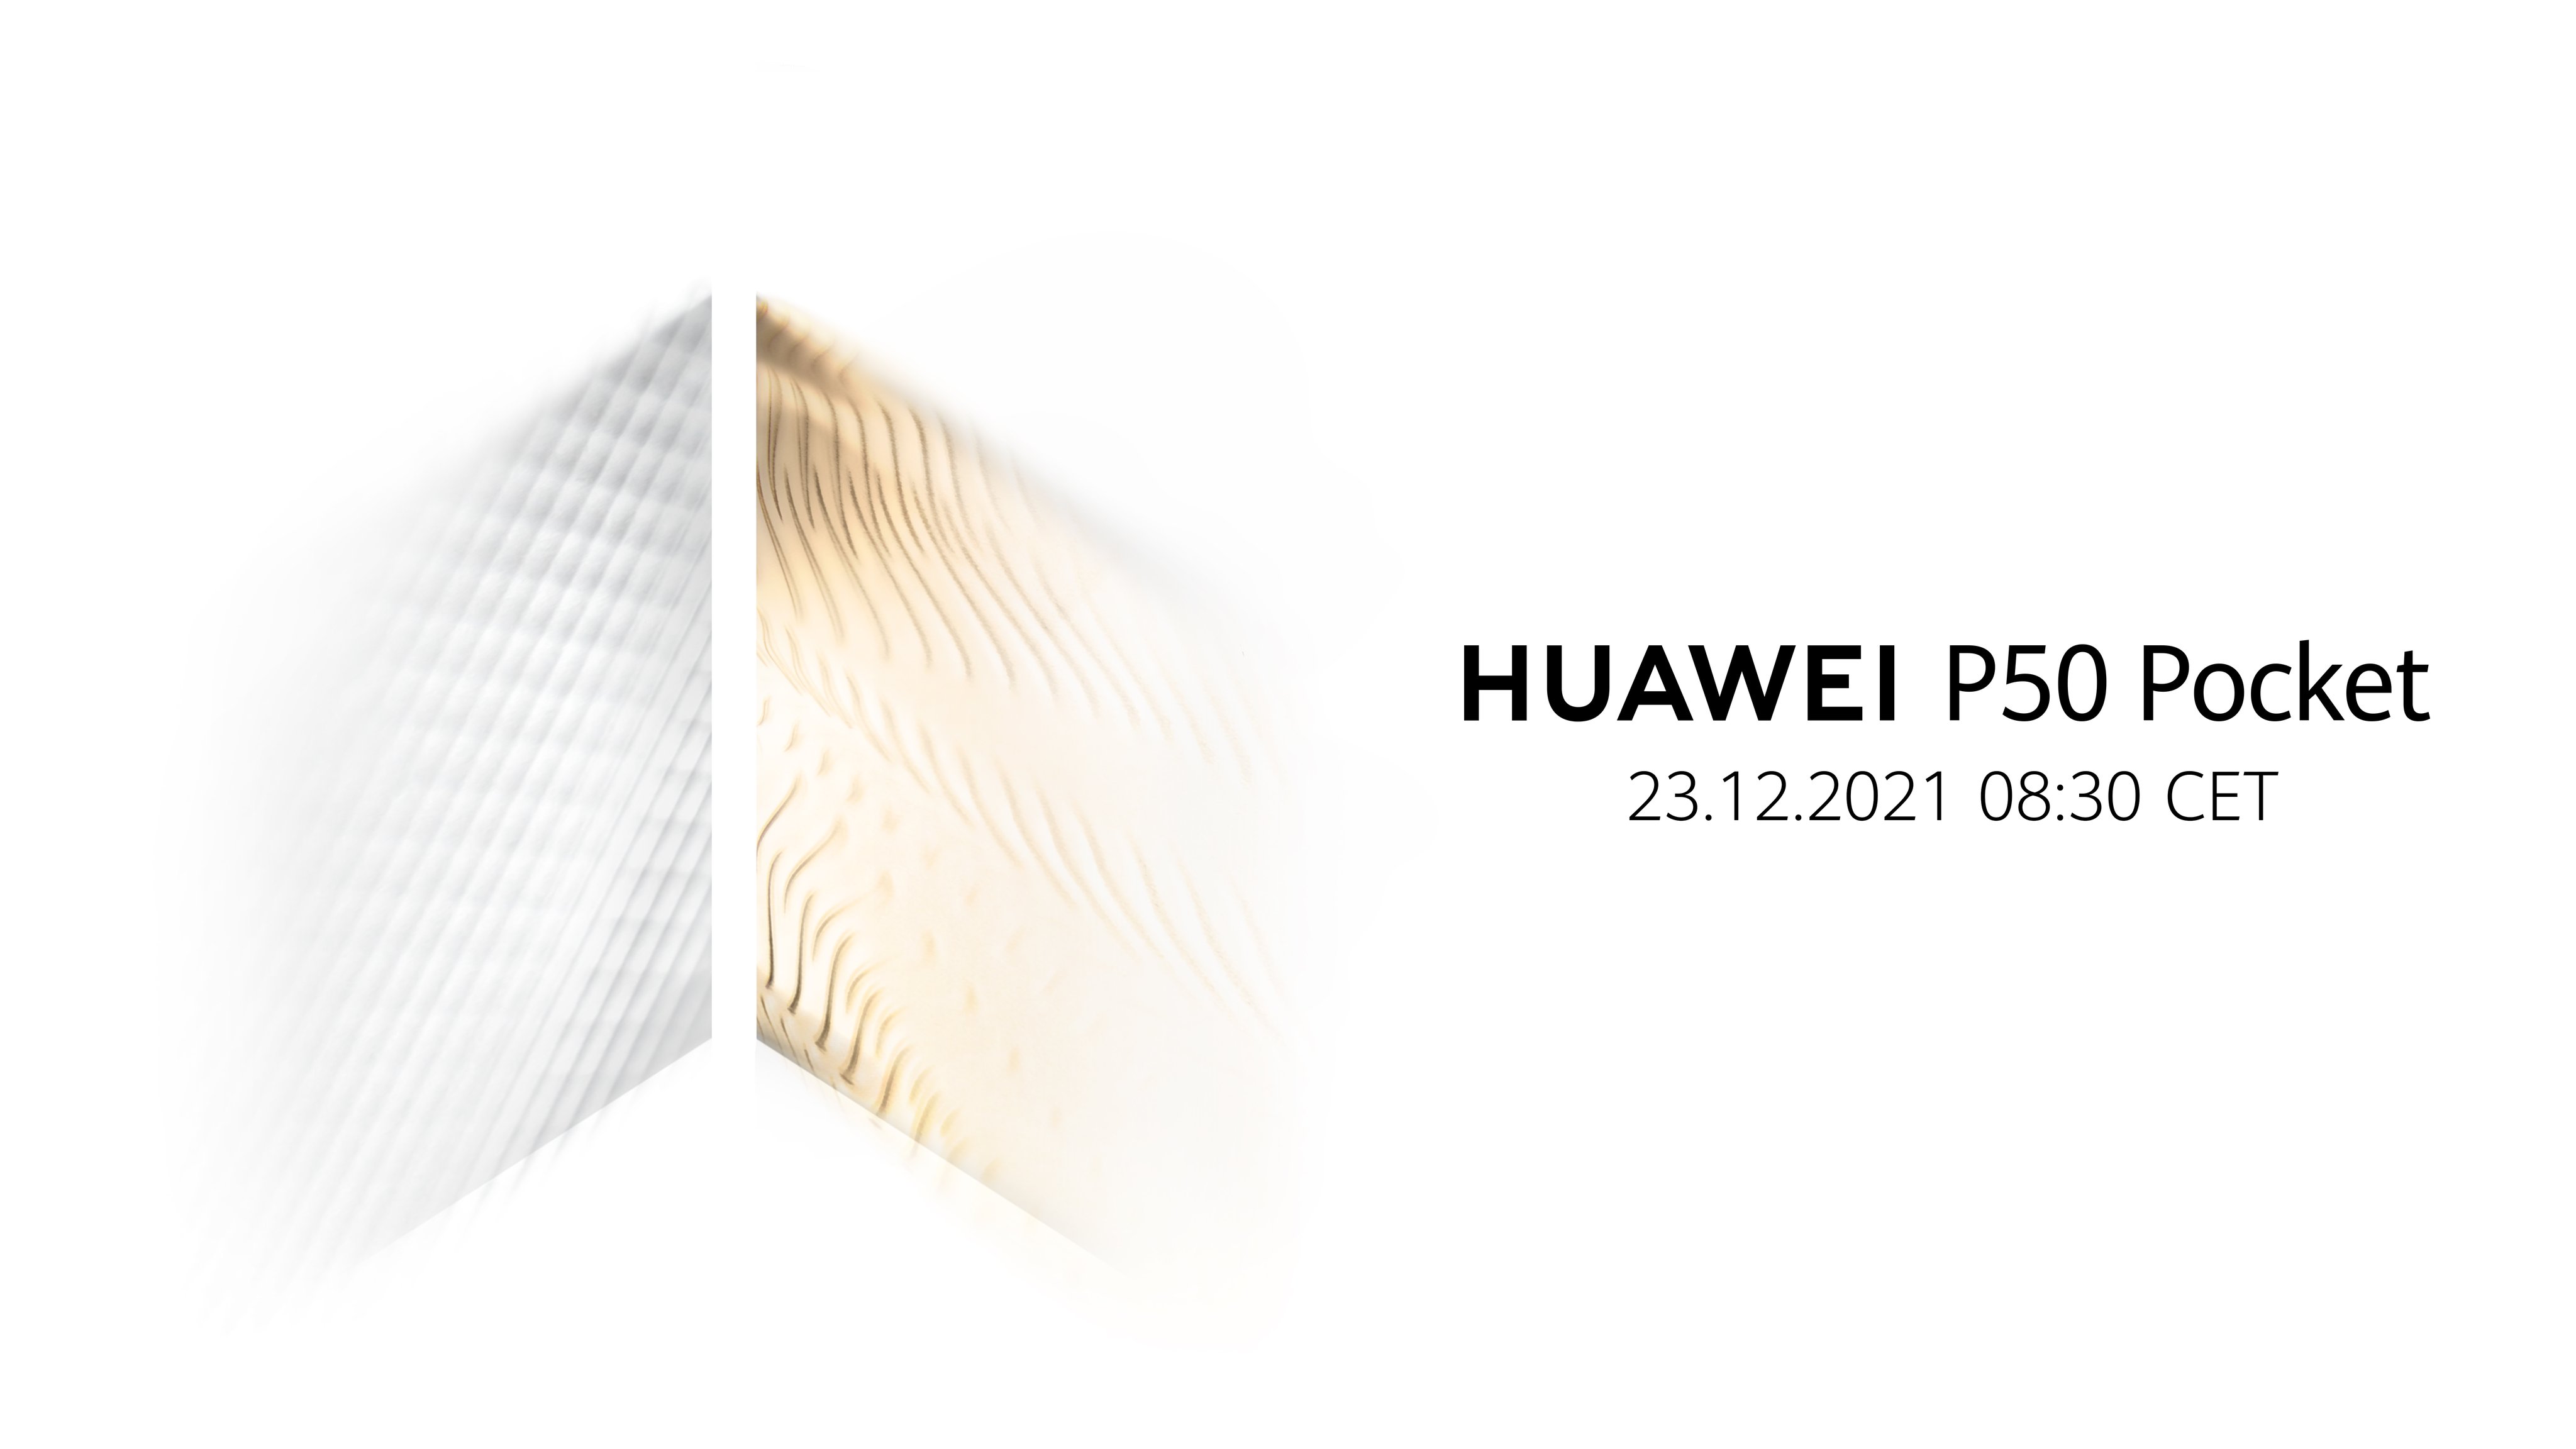 Official: Huawei's new foldable smartphone will be called P50 Pocket and will be presented on December 23